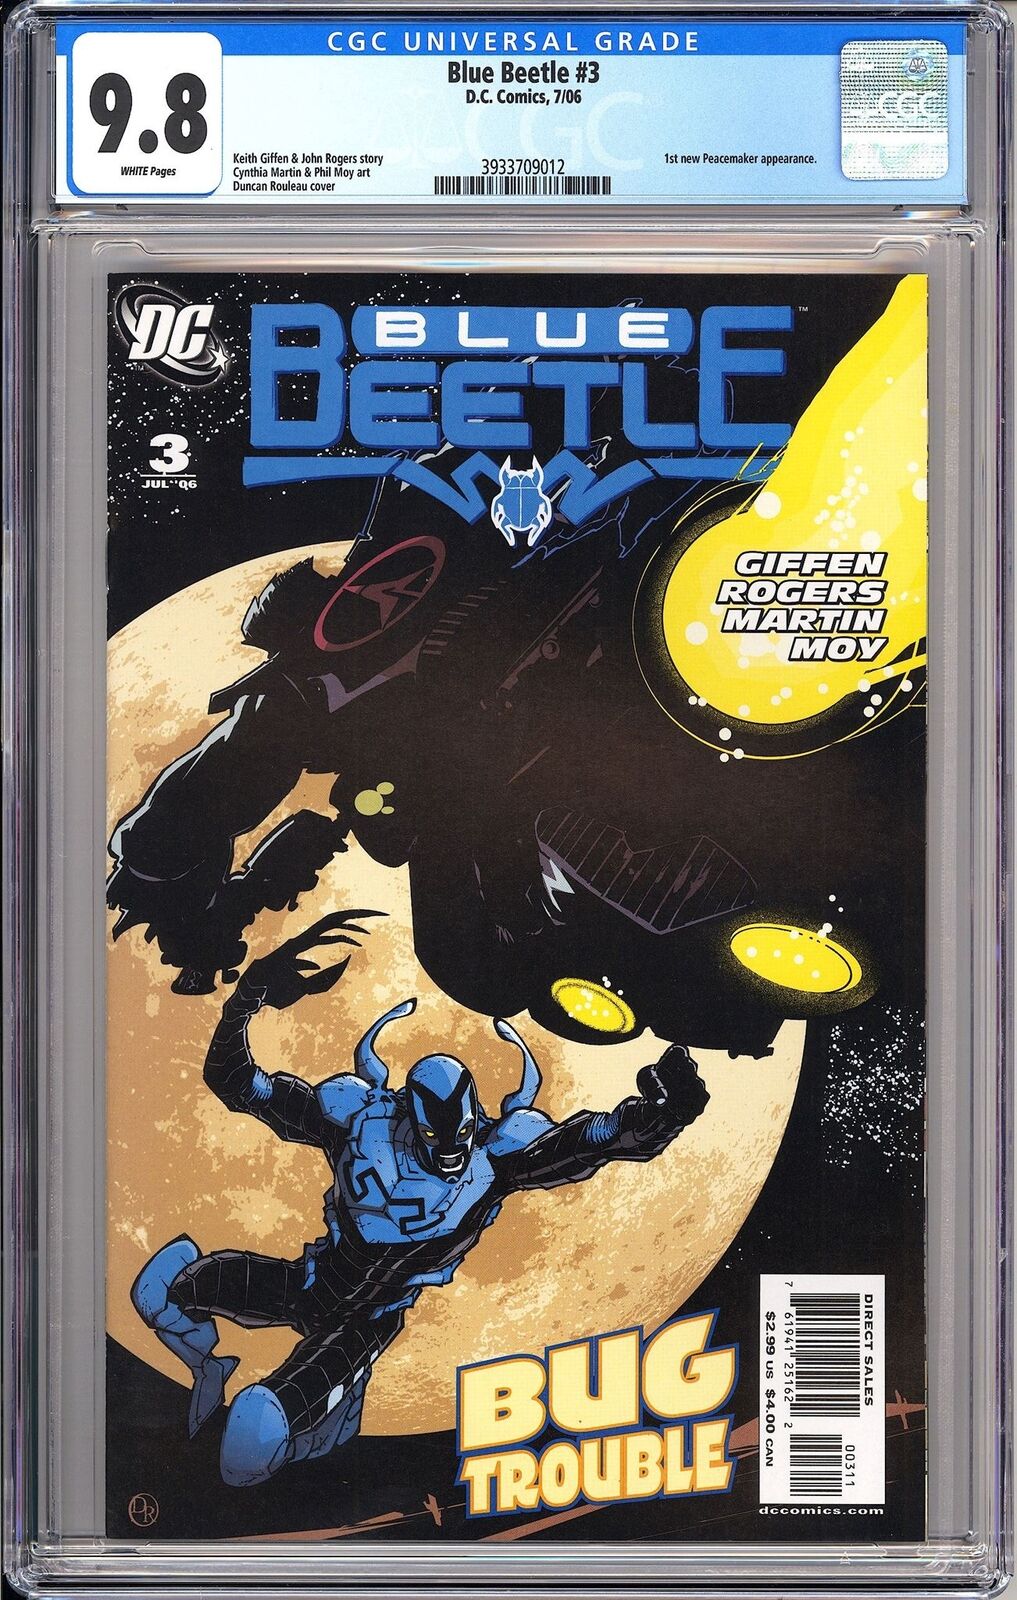 Blue Beetle #3 CGC 9.8 2006 3933709012 1st New Peacemaker KEY HBOMax